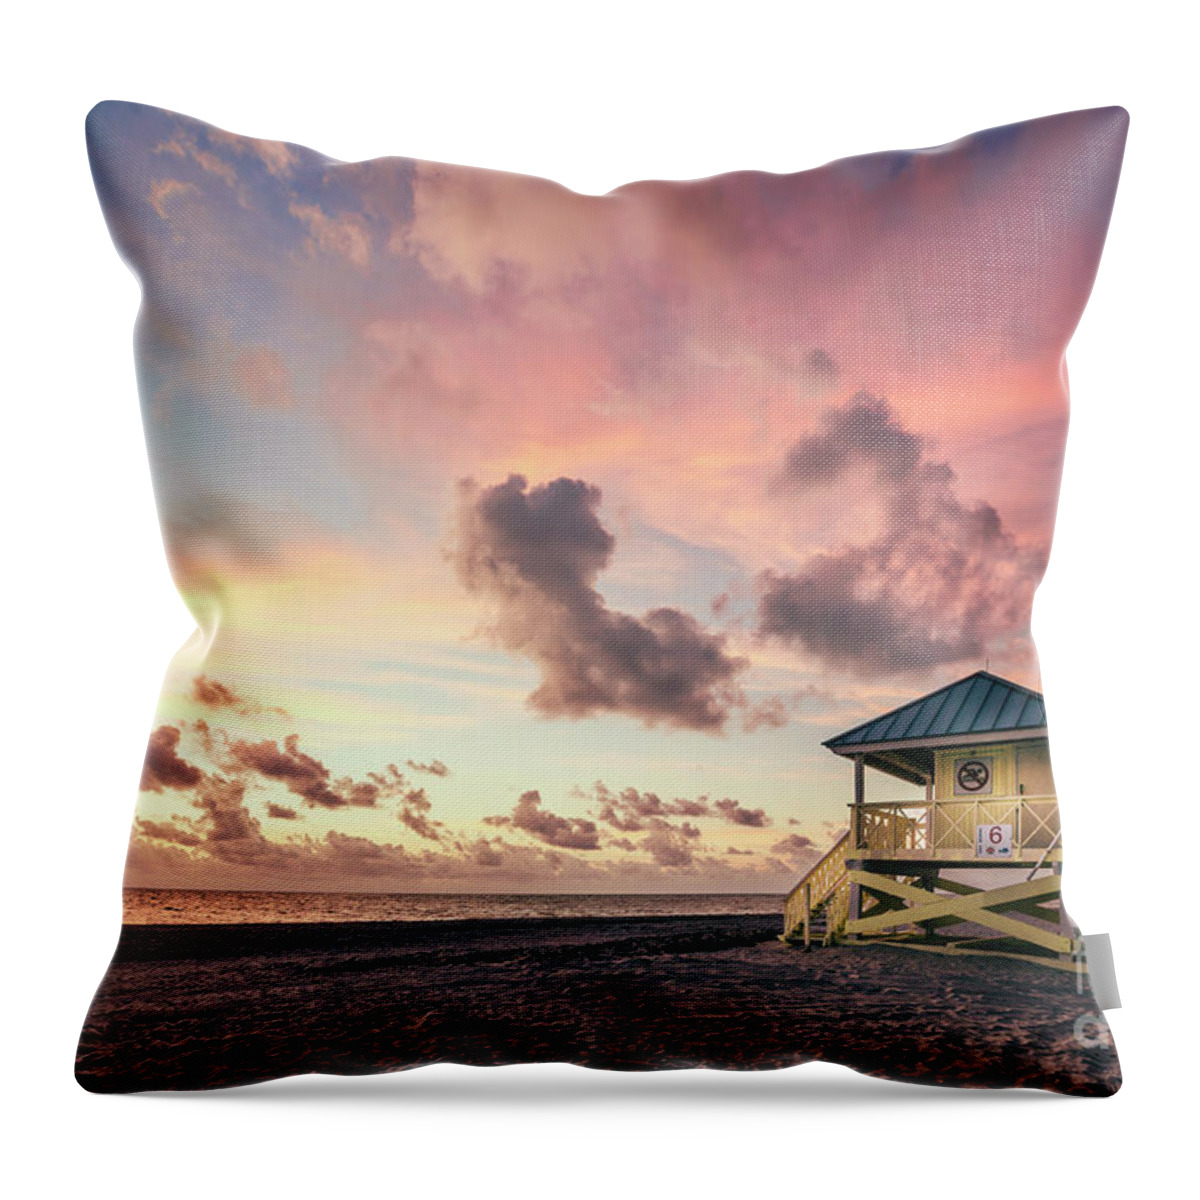 Kremsdorf Throw Pillow featuring the photograph The Majesty Of Sunrise by Evelina Kremsdorf